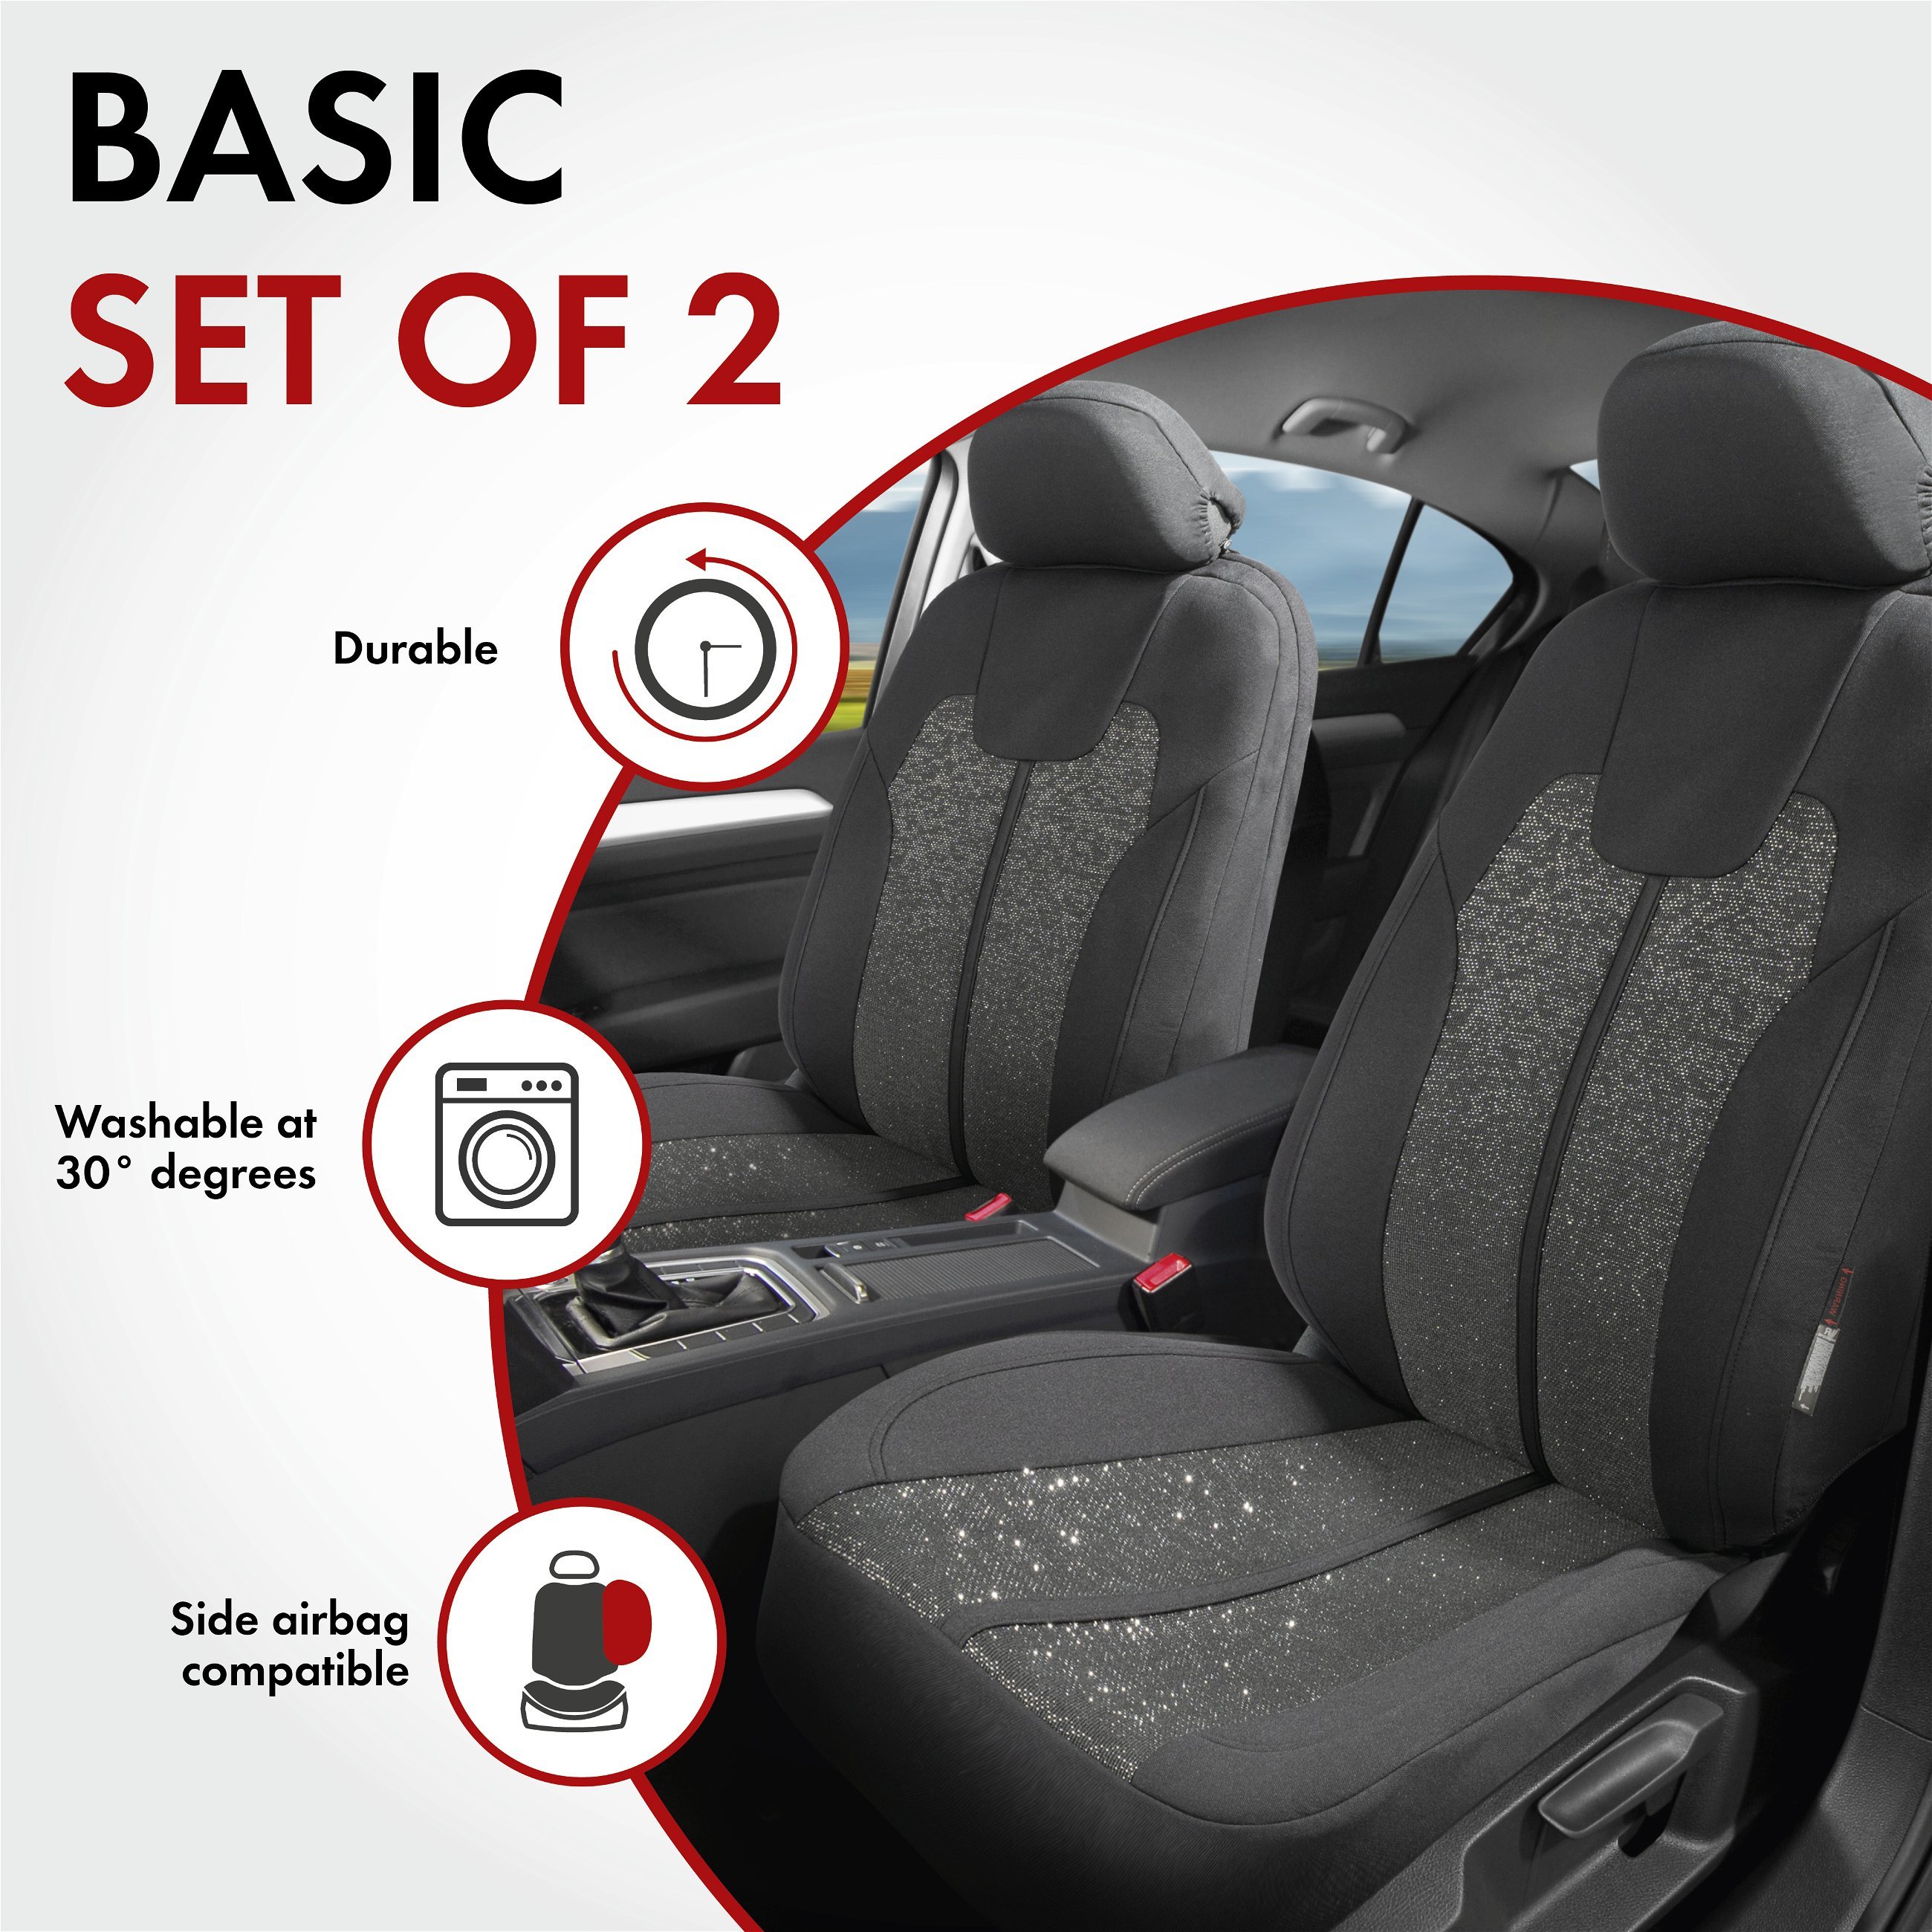 ZIPP IT Car seat covers Corso for two front seats with zip-system black/silver